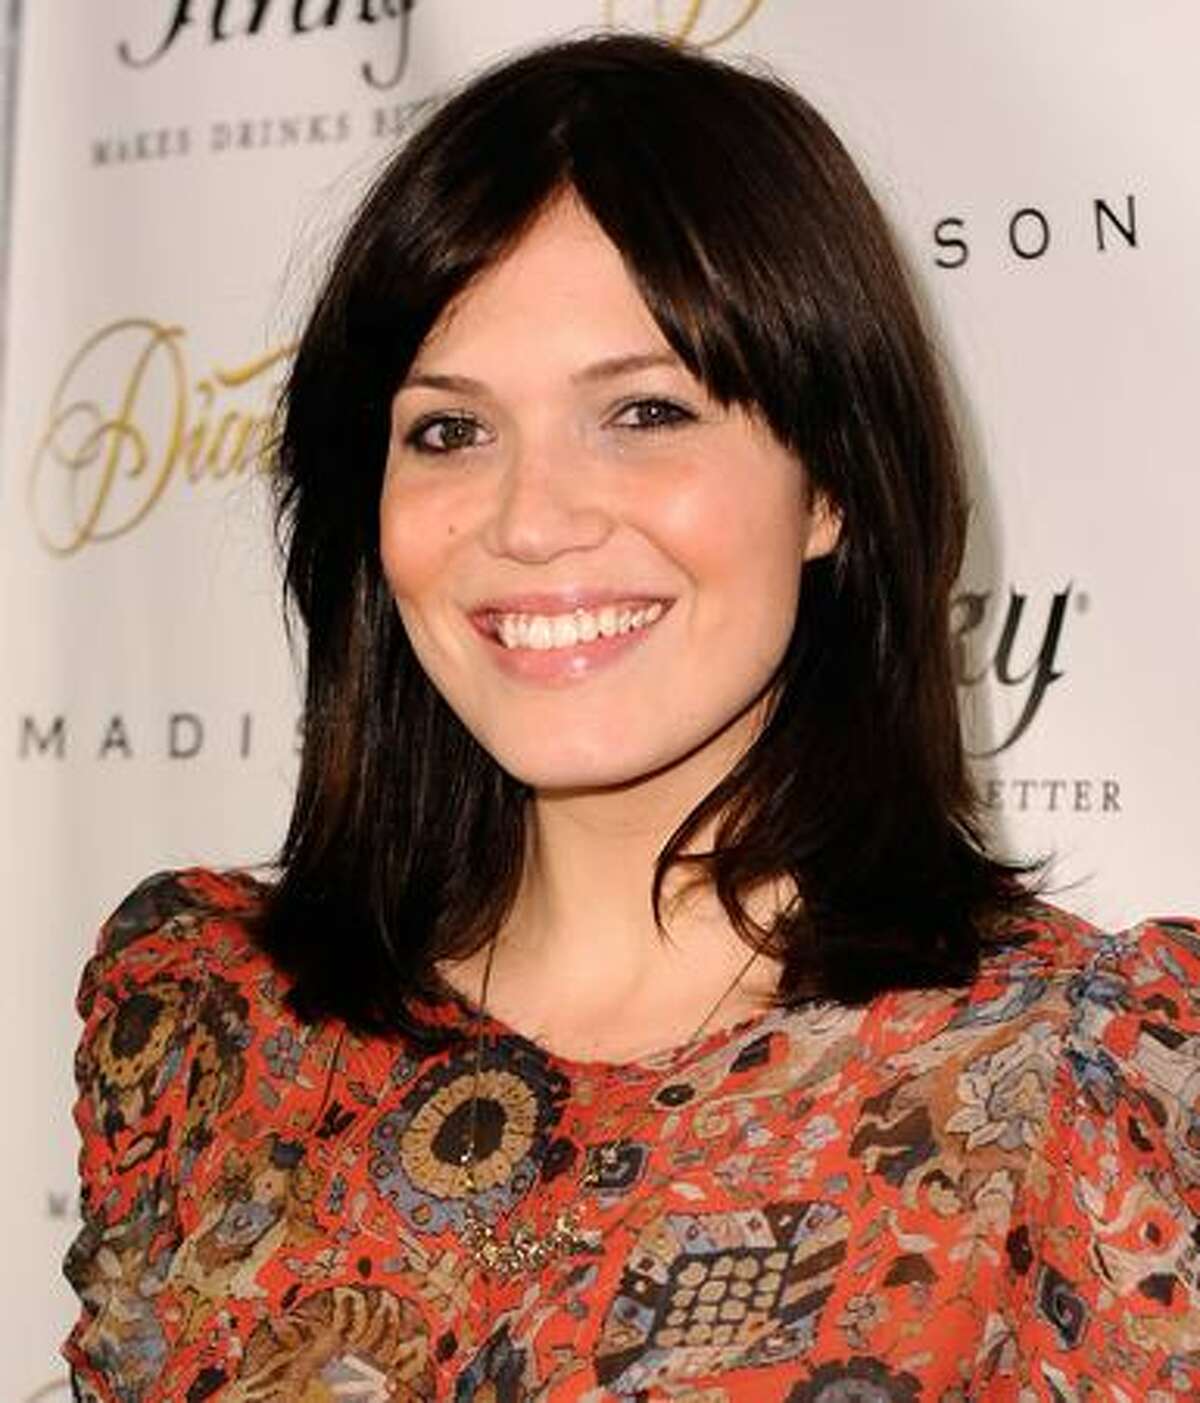 Actress/singer Mandy Moore arrives at the Madison and Diavolina Launch party in Los Angeles, California.